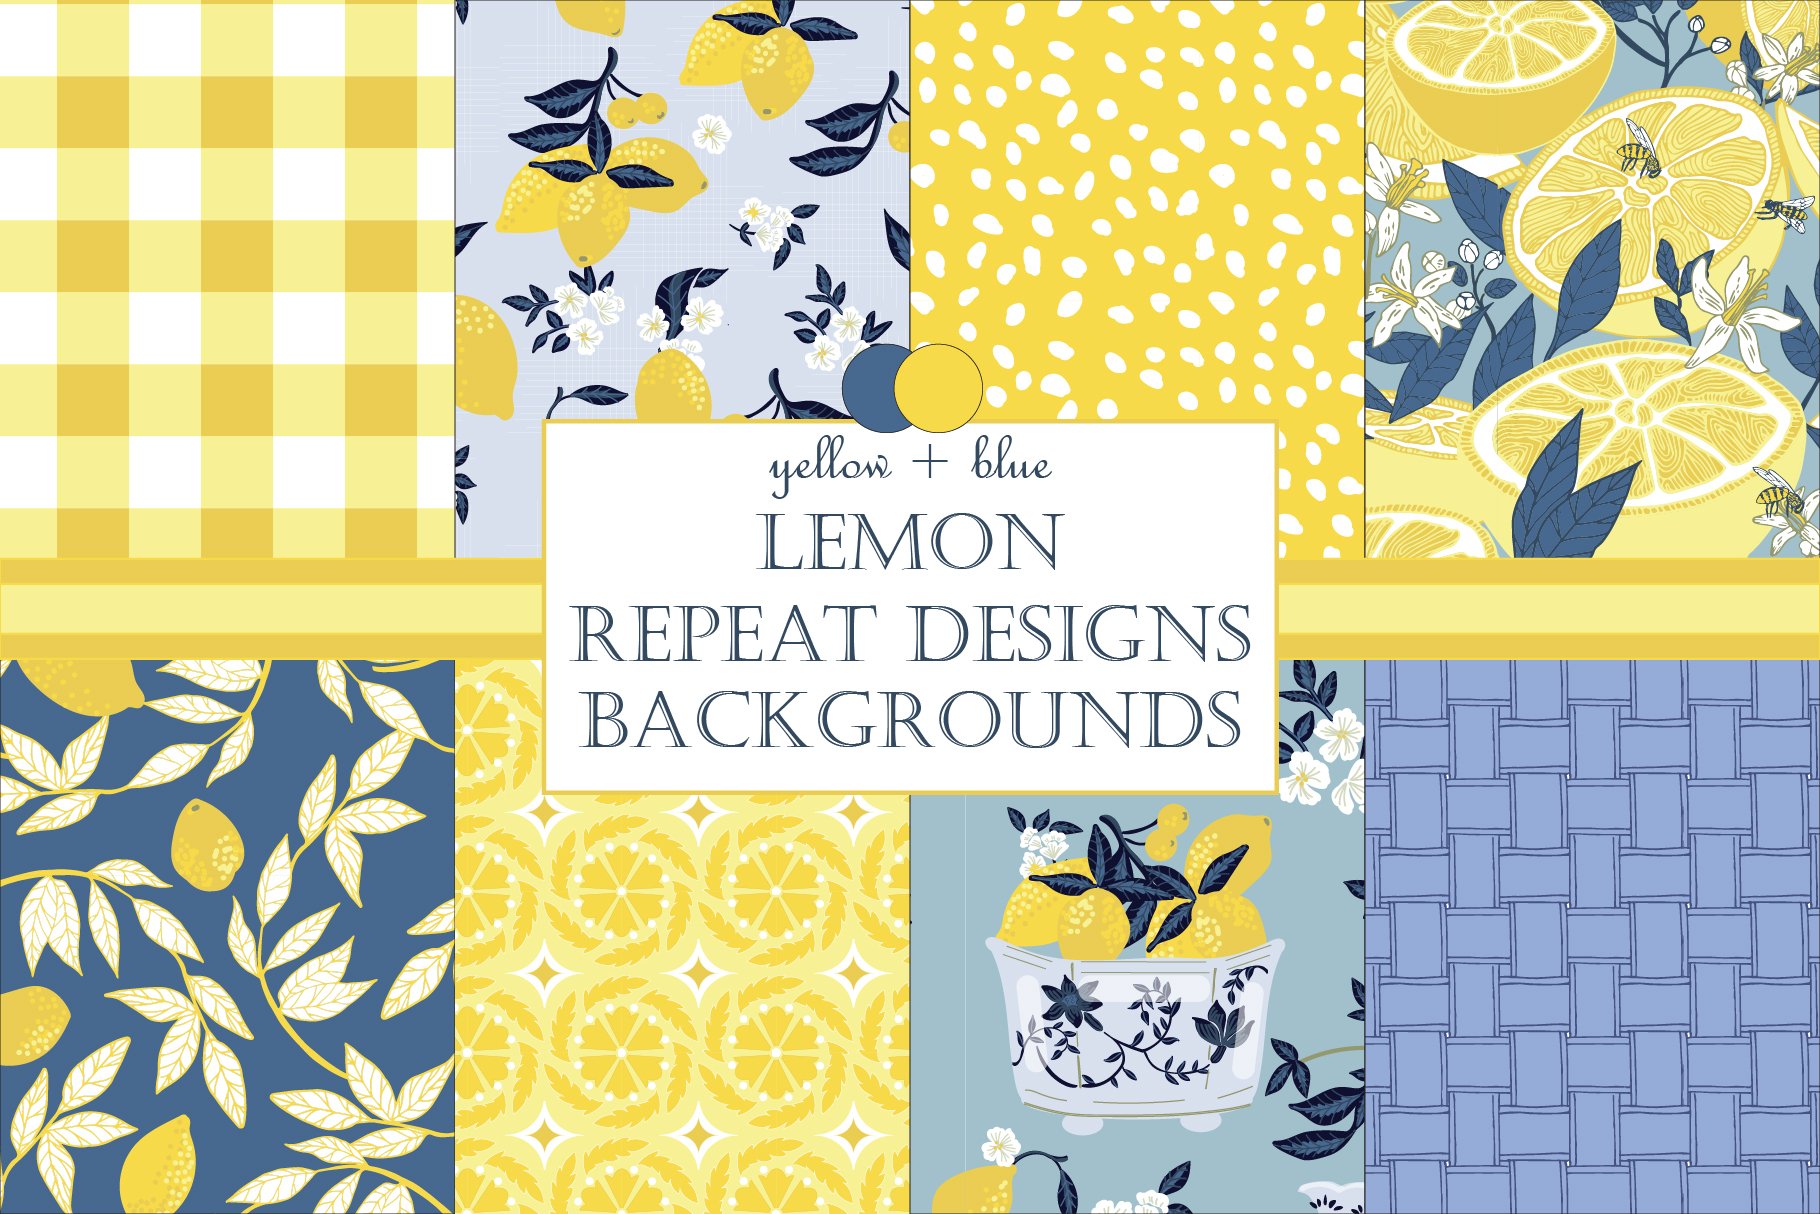 Lemon Repeat Pattern Background cover image.